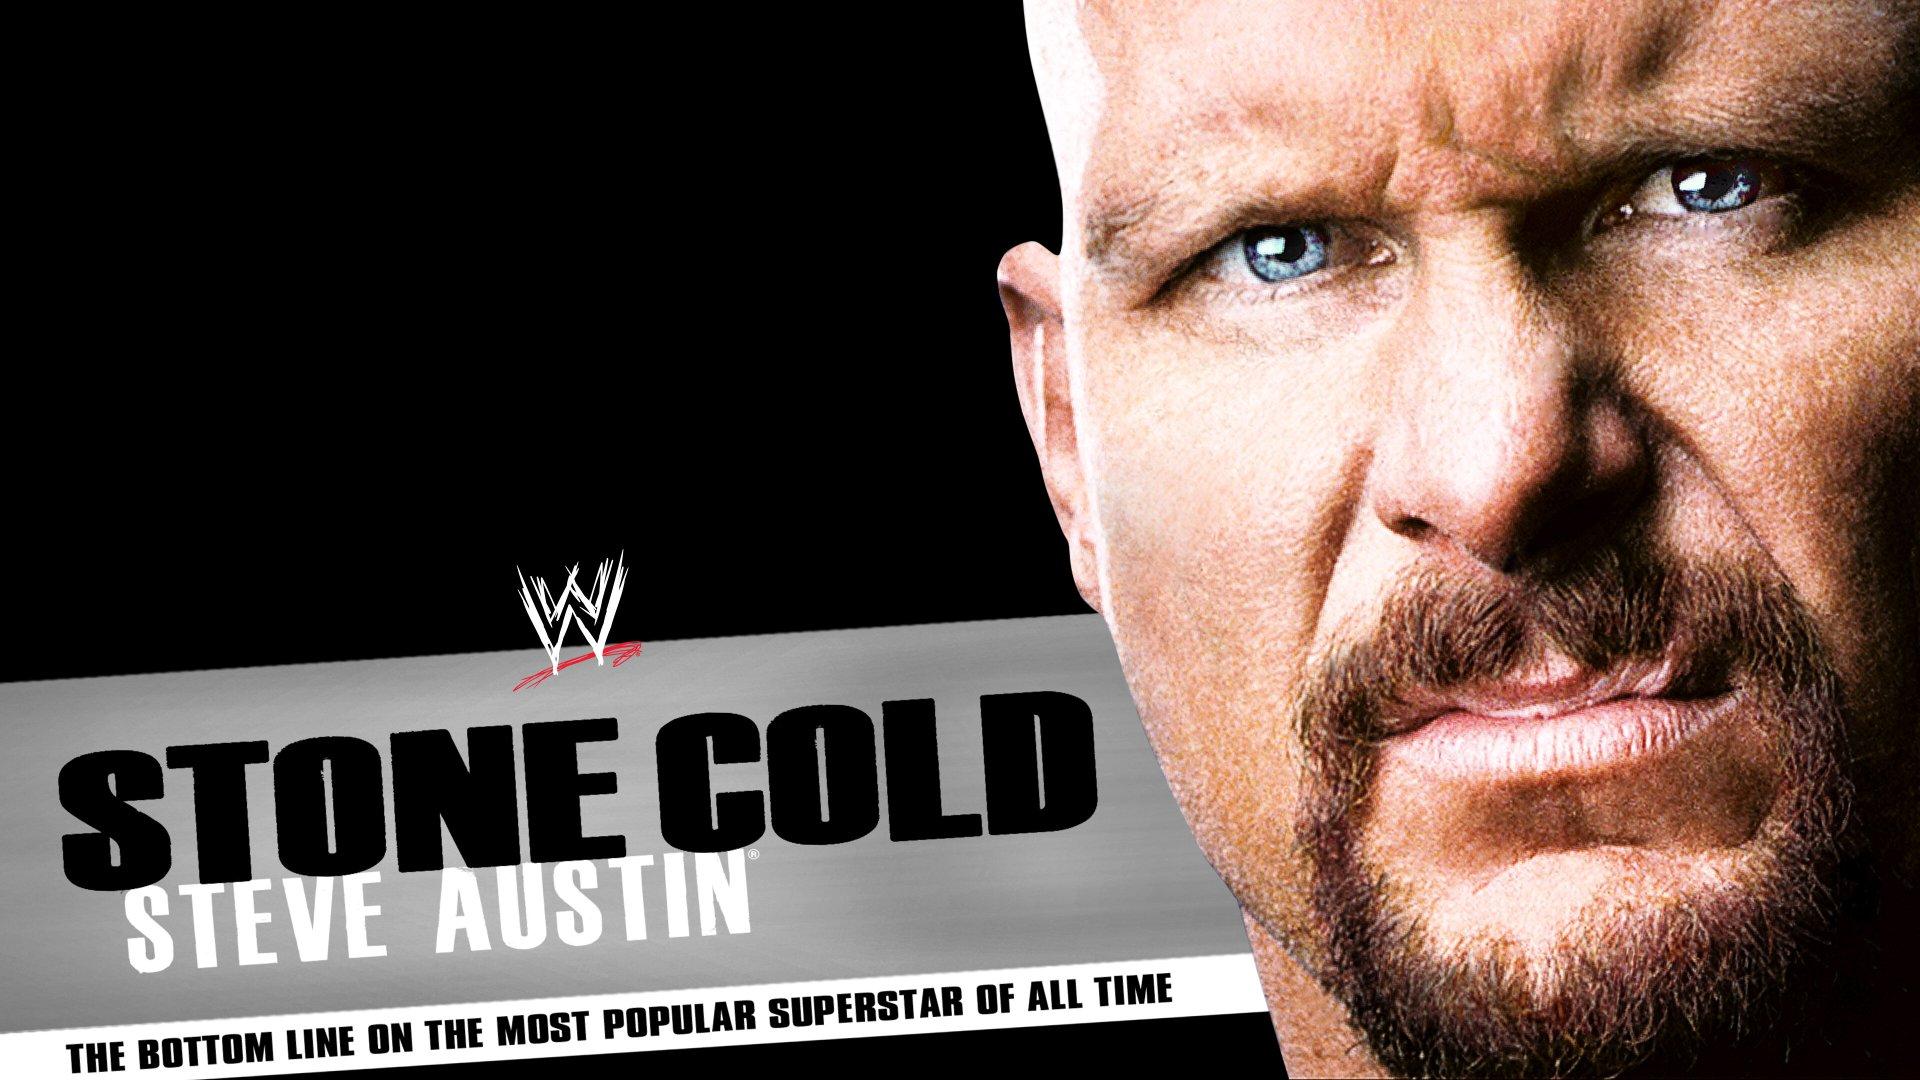 WWE: Stone Cold Steve Austin: The Bottom Line on the Most Popular Superstar of All Time